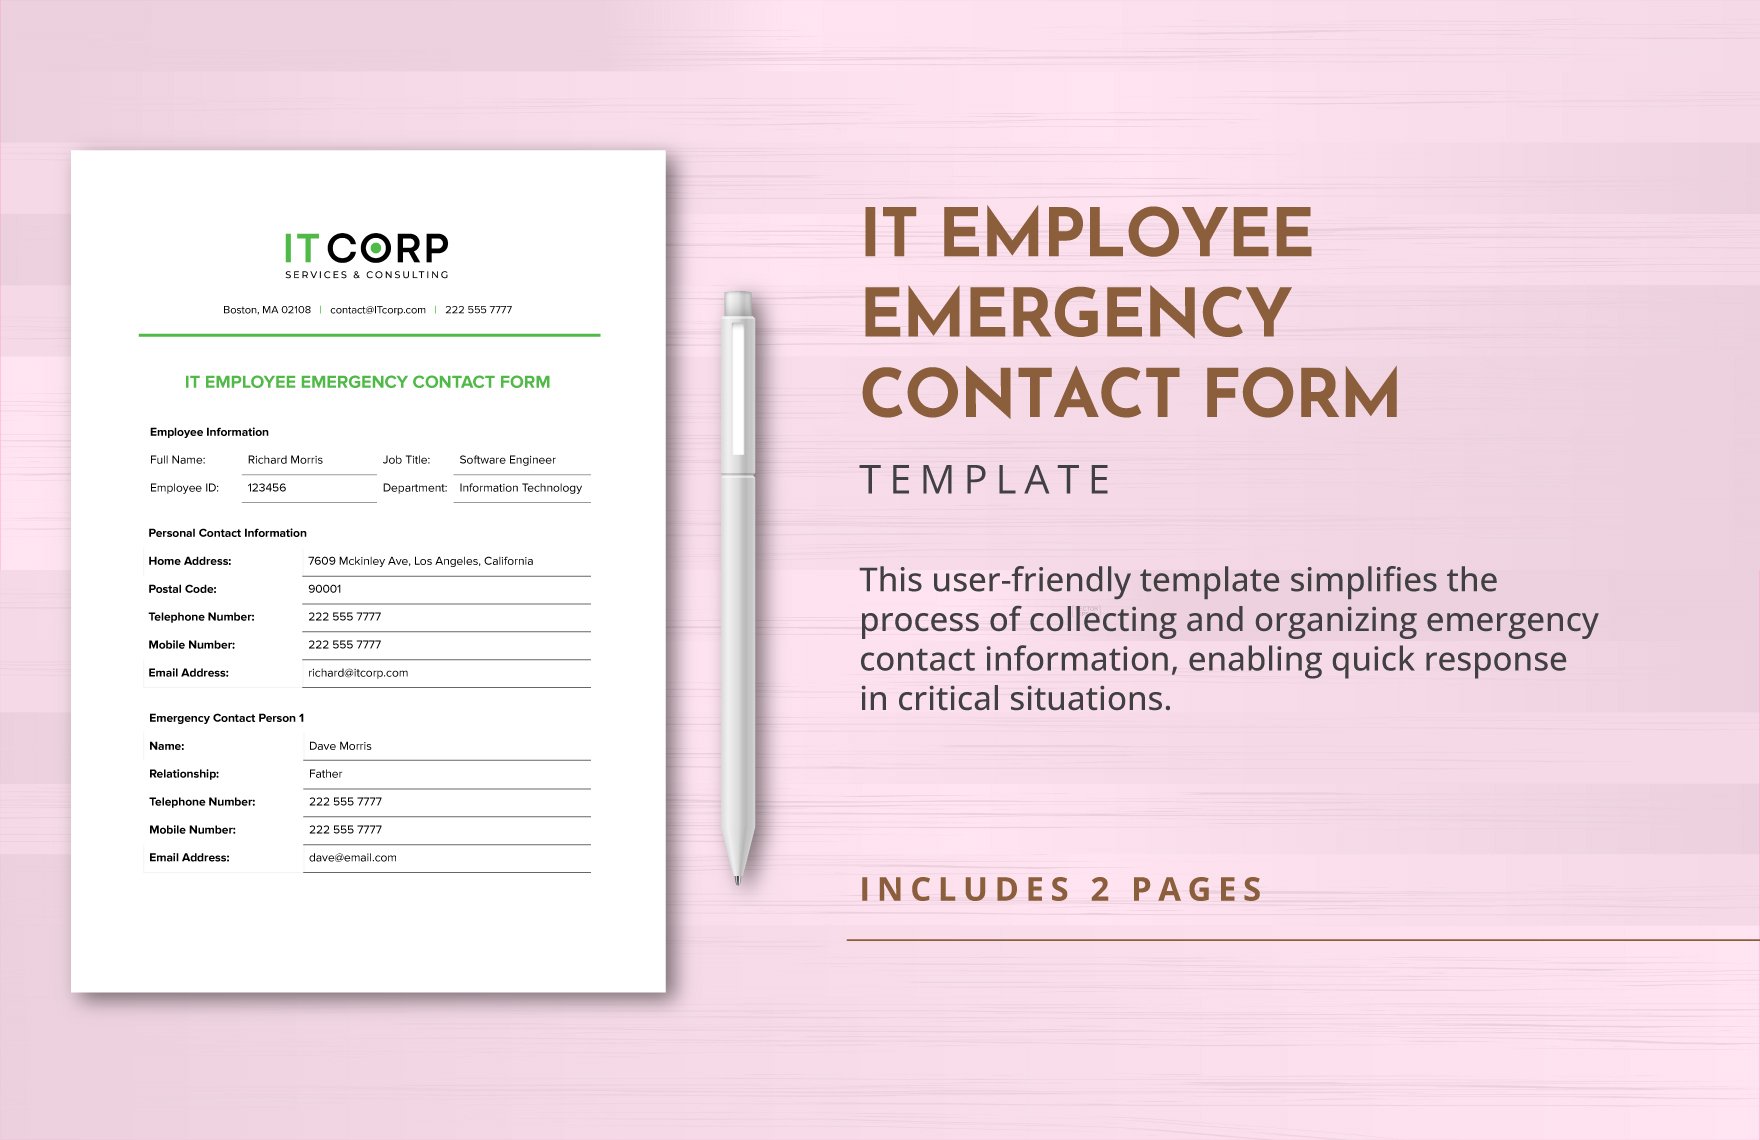 IT Employee Emergency Contact Form Template in Word, Google Docs, PDF